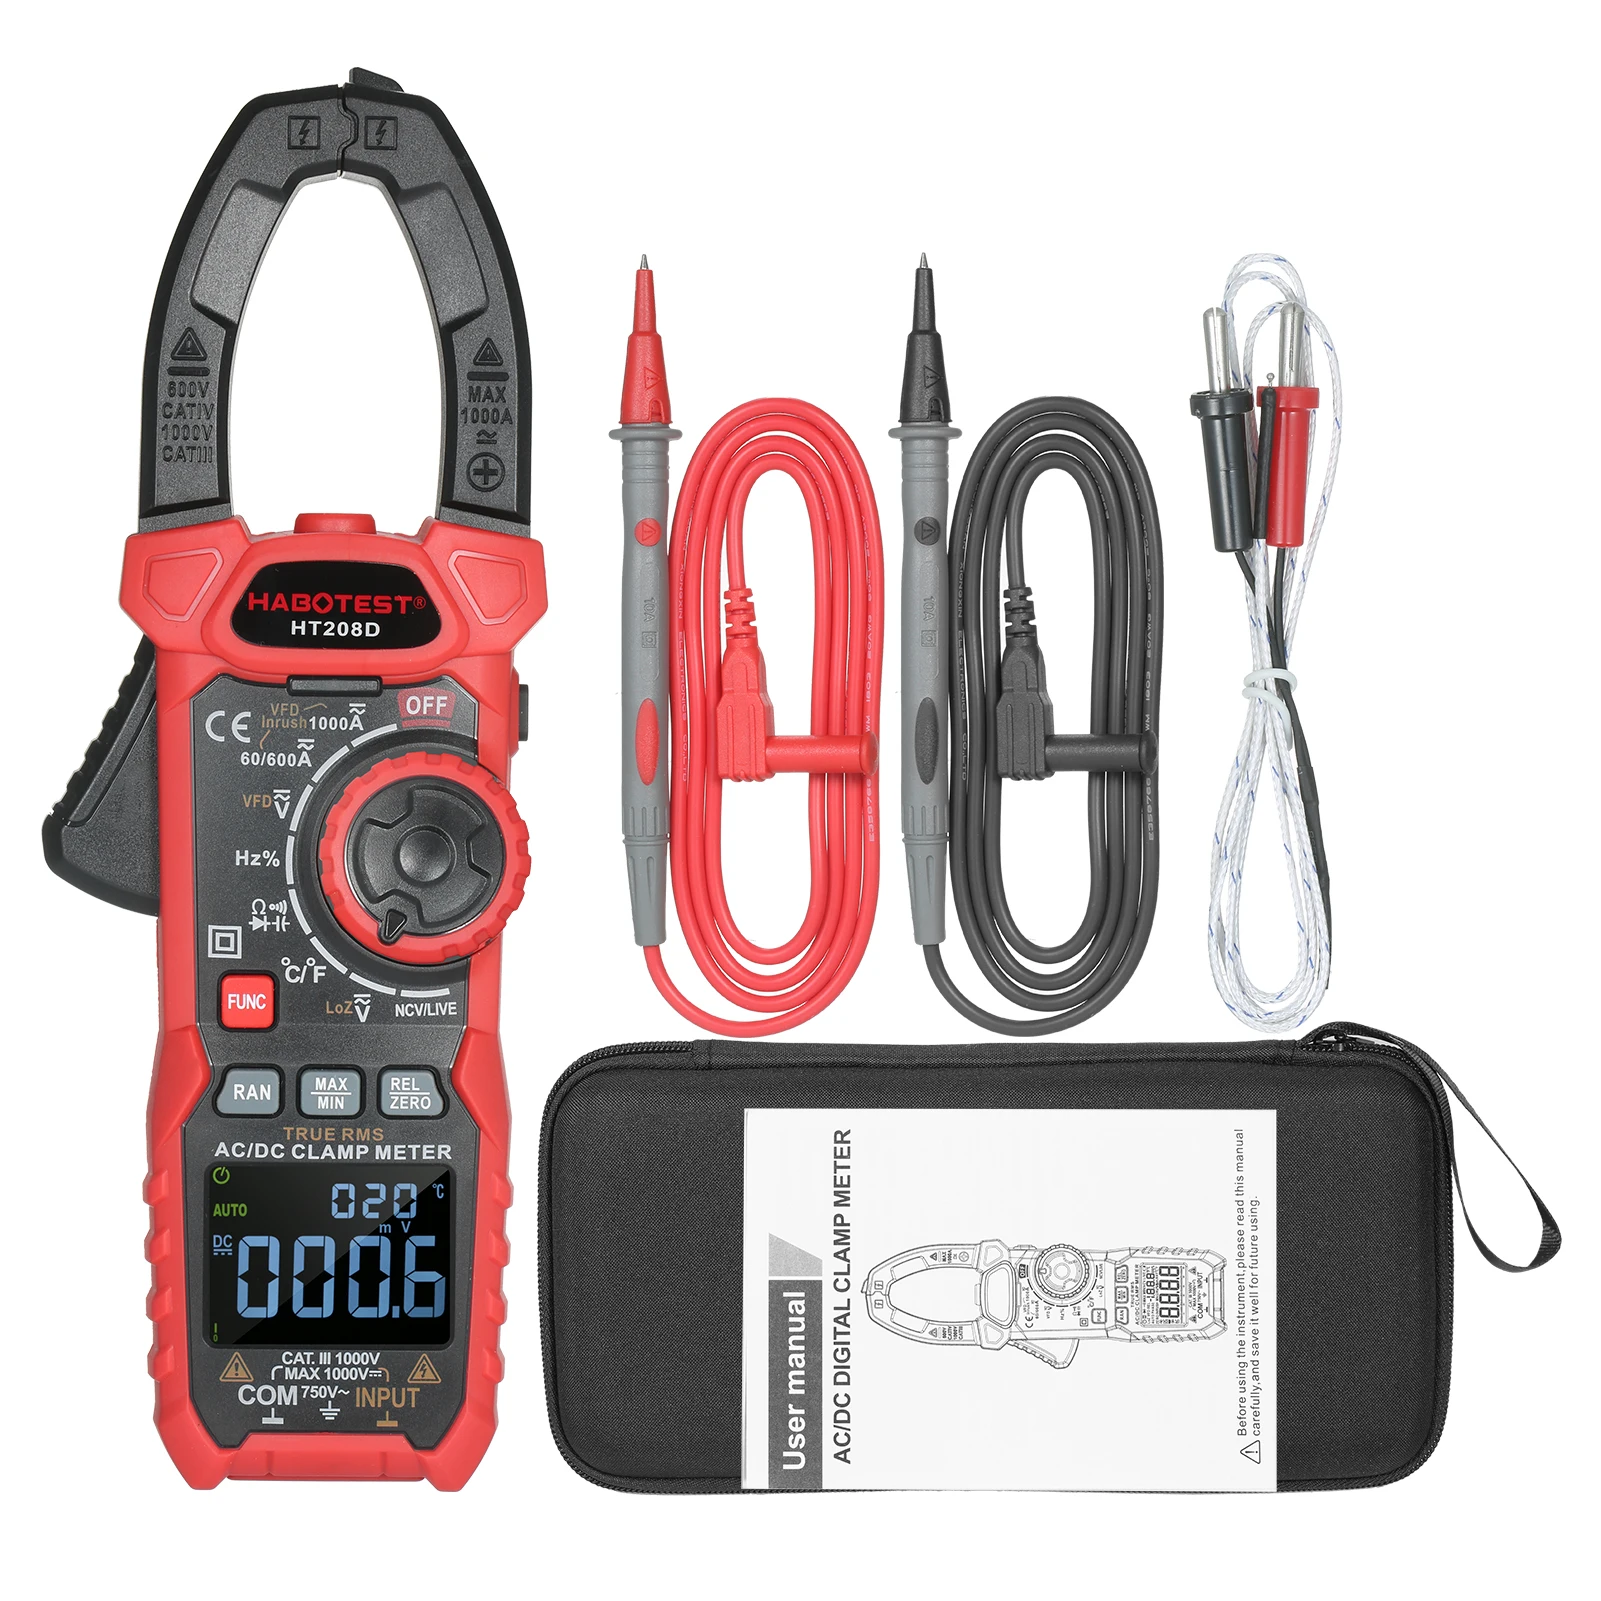 

HABOTEST HT208D/HT208A AC/DC Digital Clamp Meter True-RMS Multimeter Anto-Ranging Tester Current Clamp with Amp Volt Ohm Diode